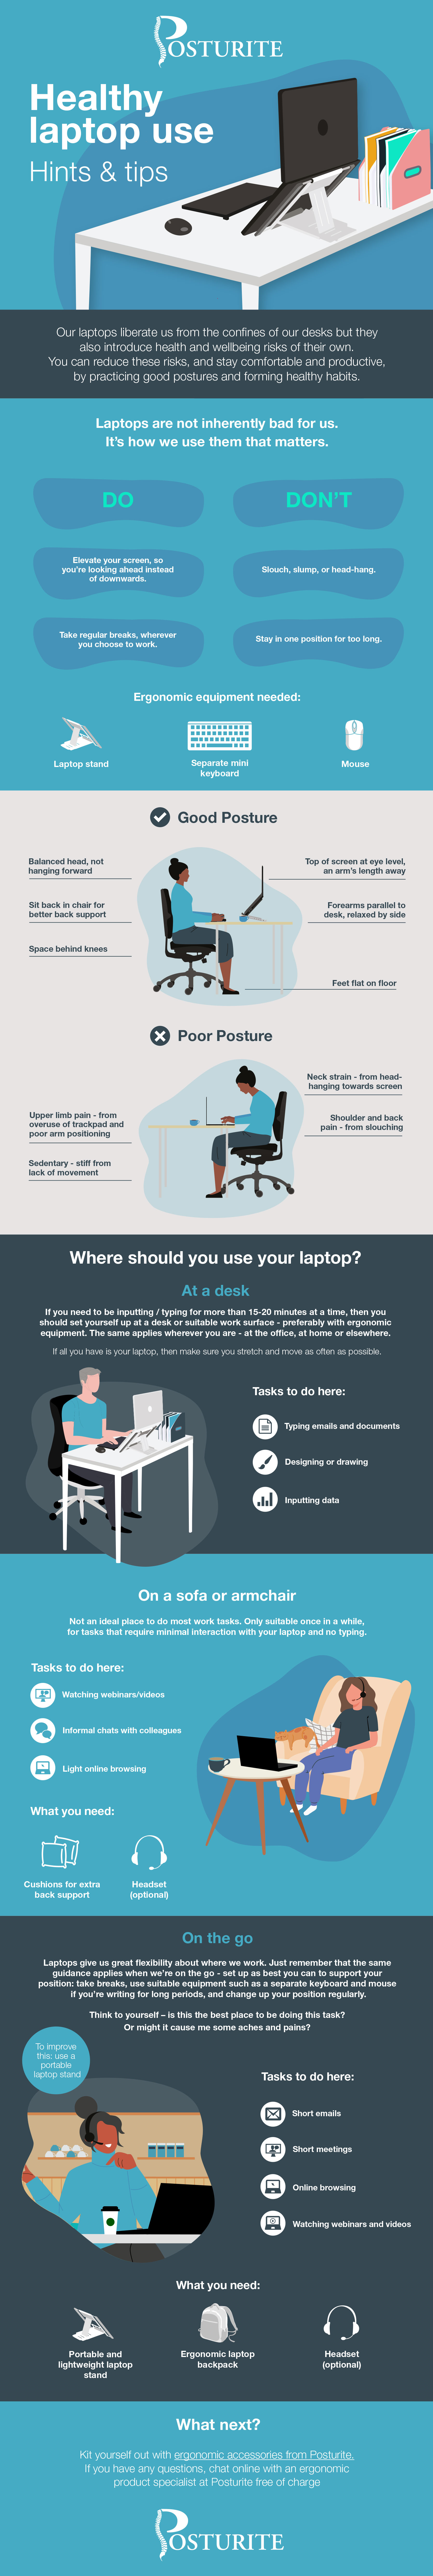 Healthy ways to work on a laptop infographic